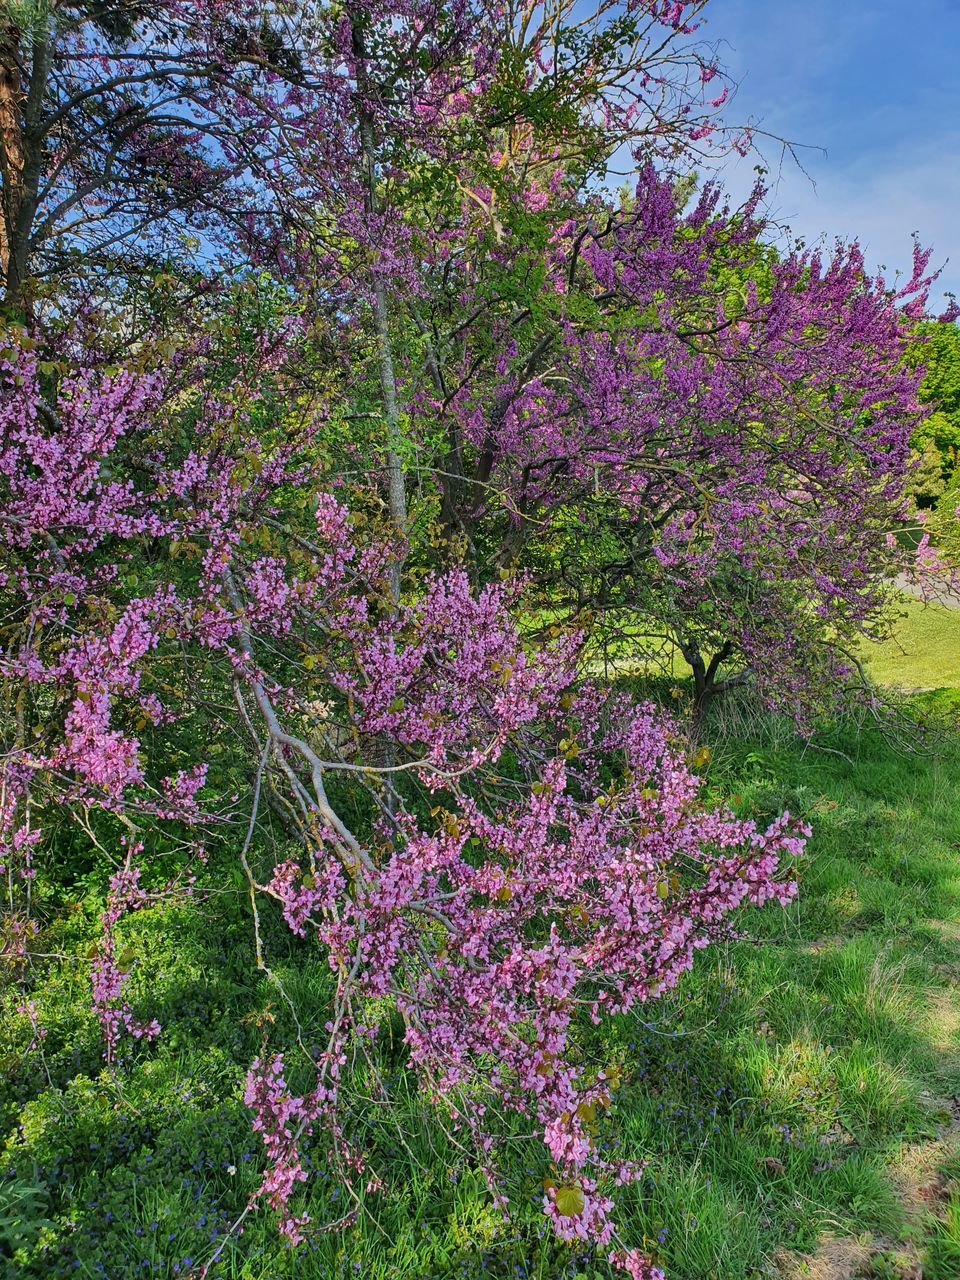 plant, beauty in nature, flower, flowering plant, growth, tree, nature, blossom, shrub, no people, freshness, pink, day, wildflower, fragility, springtime, lilac, land, outdoors, purple, tranquility, low angle view, garden, sky, green, botany, branch